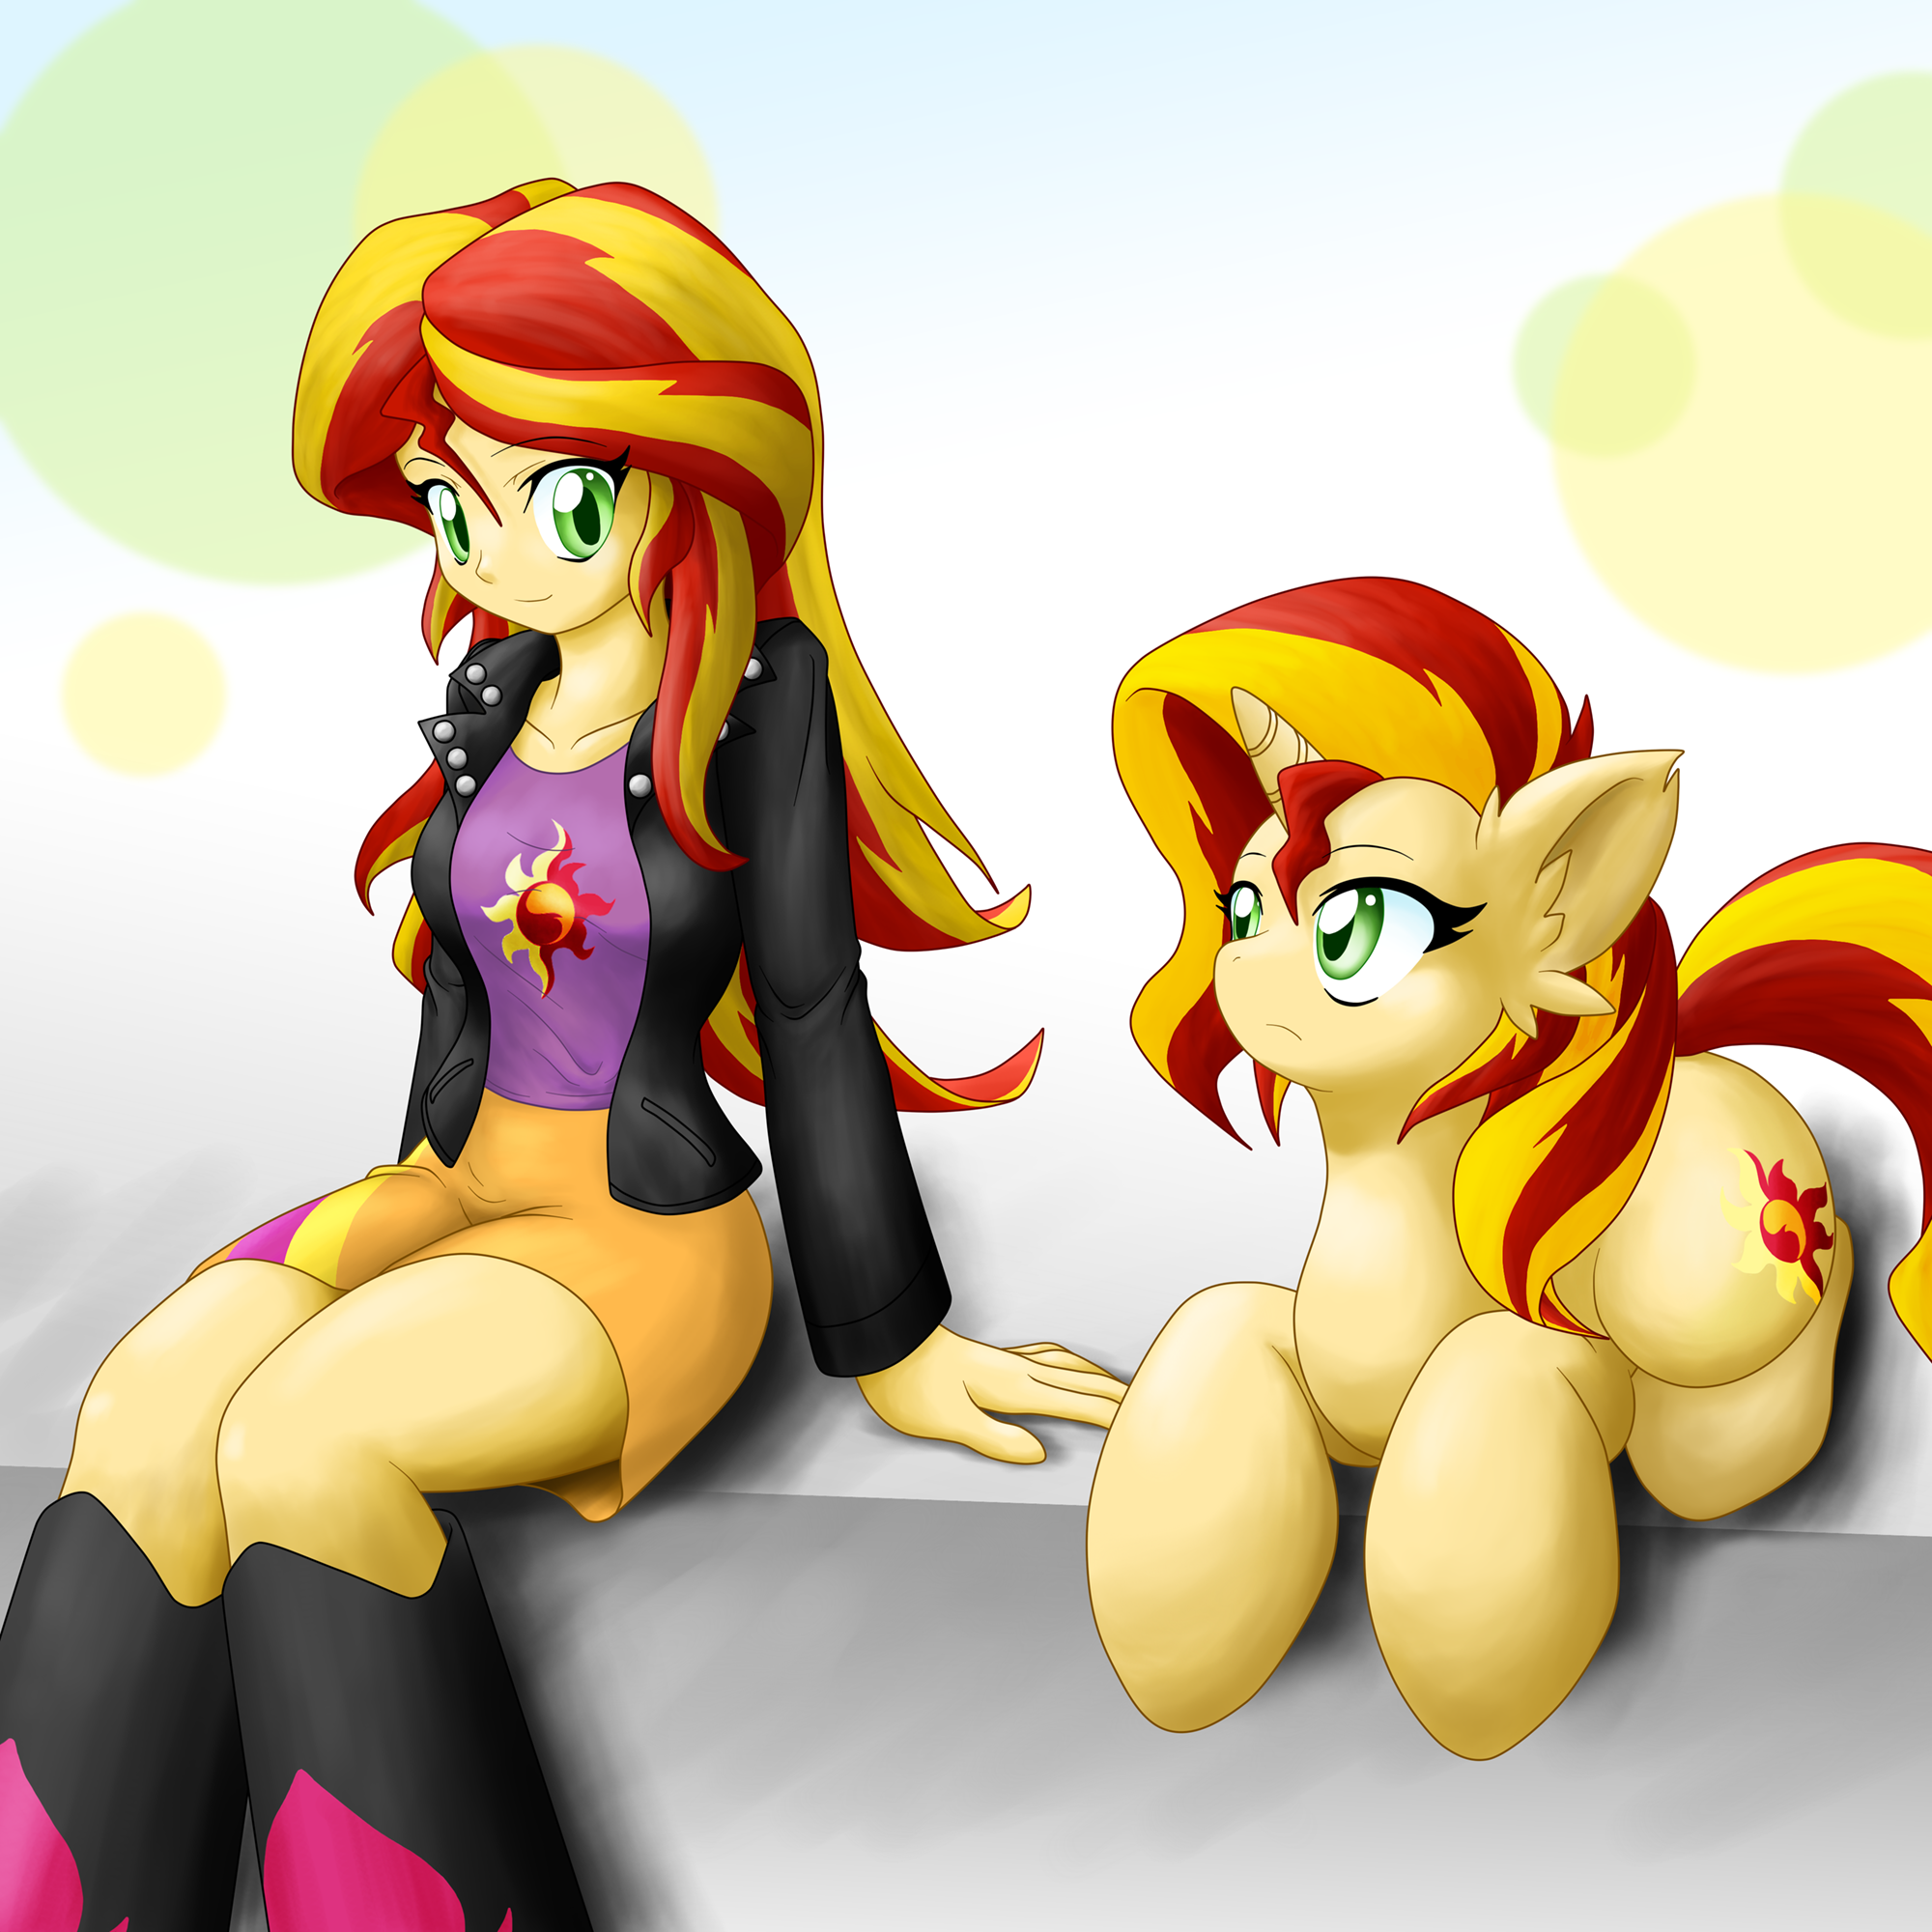 sunset_shimmer_by_ragurimo-db197t9.png